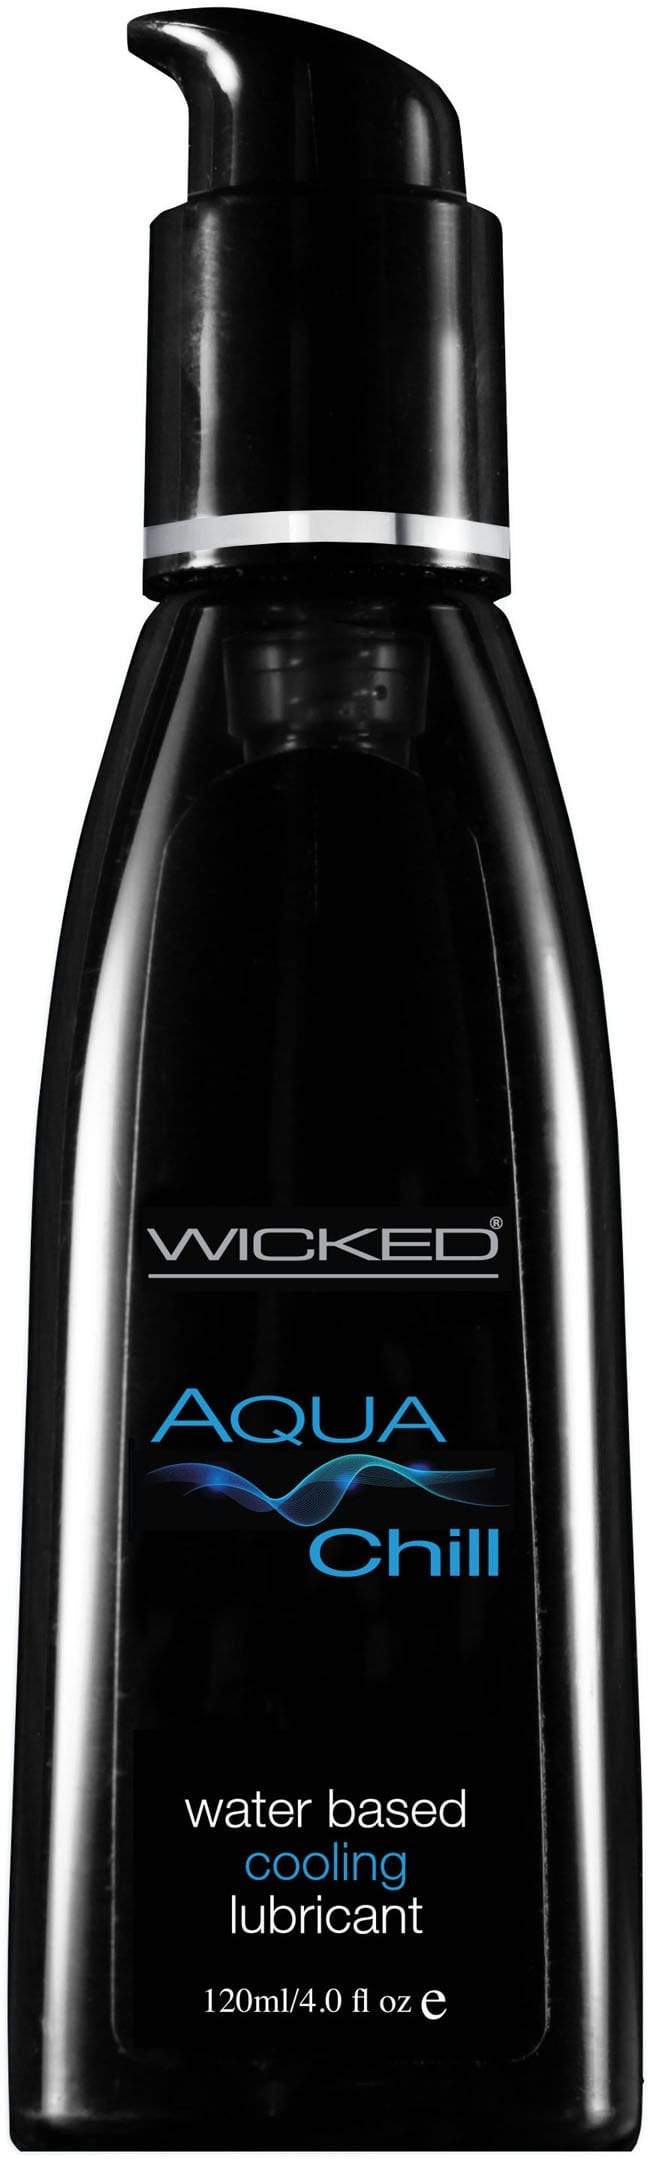 wicked aqua chill water based cooling lubricant 4 0 fl oz 120 ml